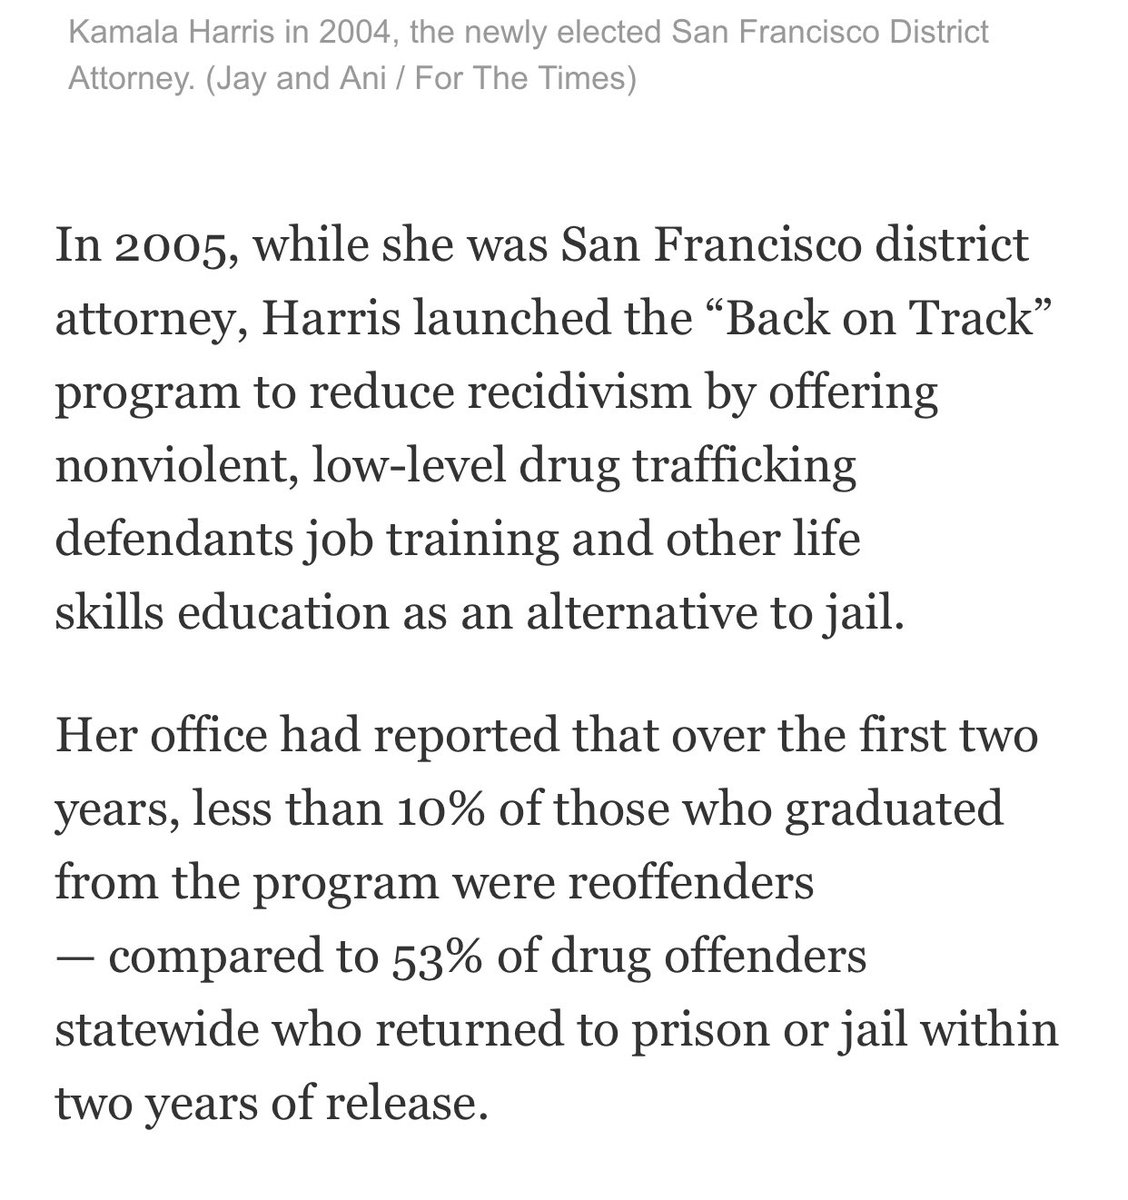 And they’re doing it AGAIN this “Kamala Harris is a cop” started by  progressive when Kamala Harris never locked up black people in fact she’s the reason why many are out of prison! Check the data for yourself